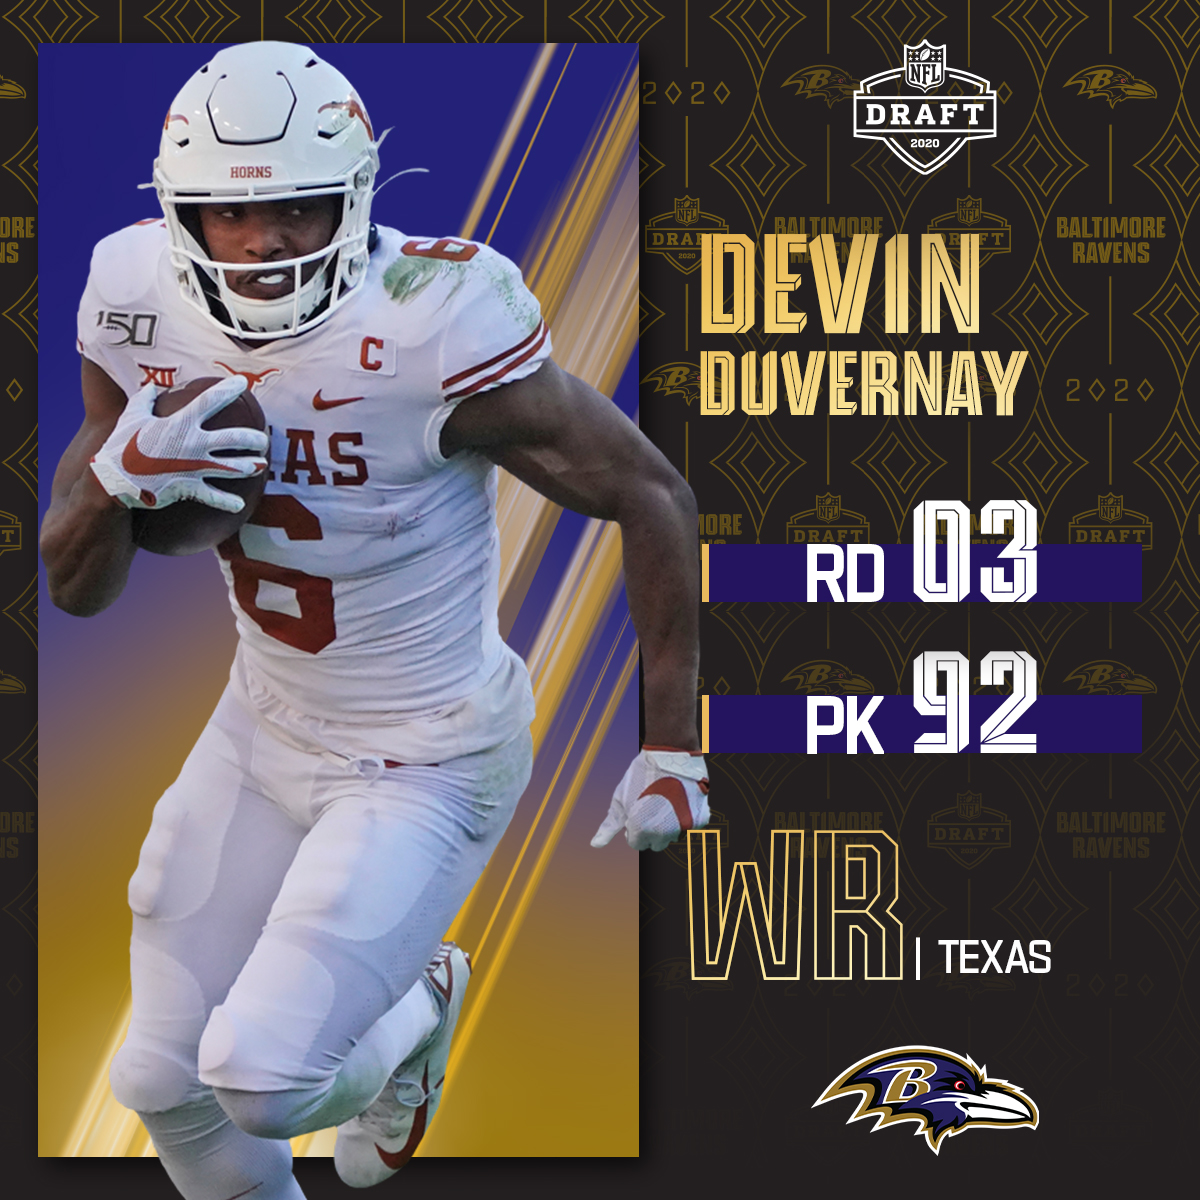 With the No. 92 overall pick, the @Ravens select @TexasFootball WR Devin Duvernay! 📺: 2020 #NFLDraft on NFLN/ESPN/ABC 📱: bit.ly/2zrlHEG